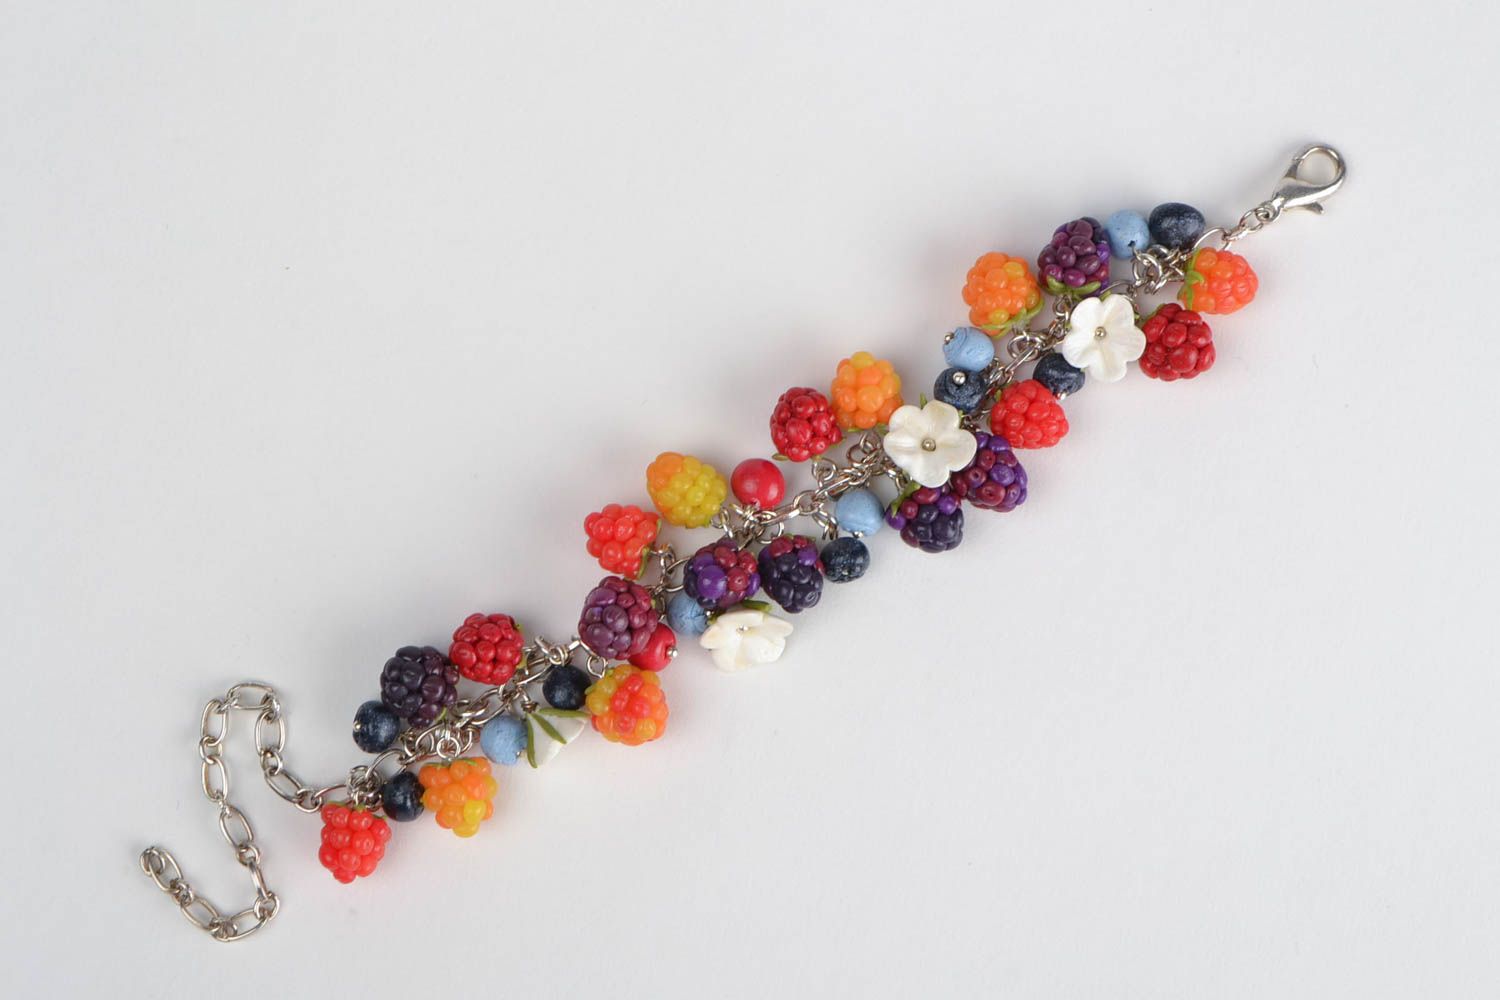 Handmade chain wrist bracelet with polymer clay colorful berries and flowers photo 3